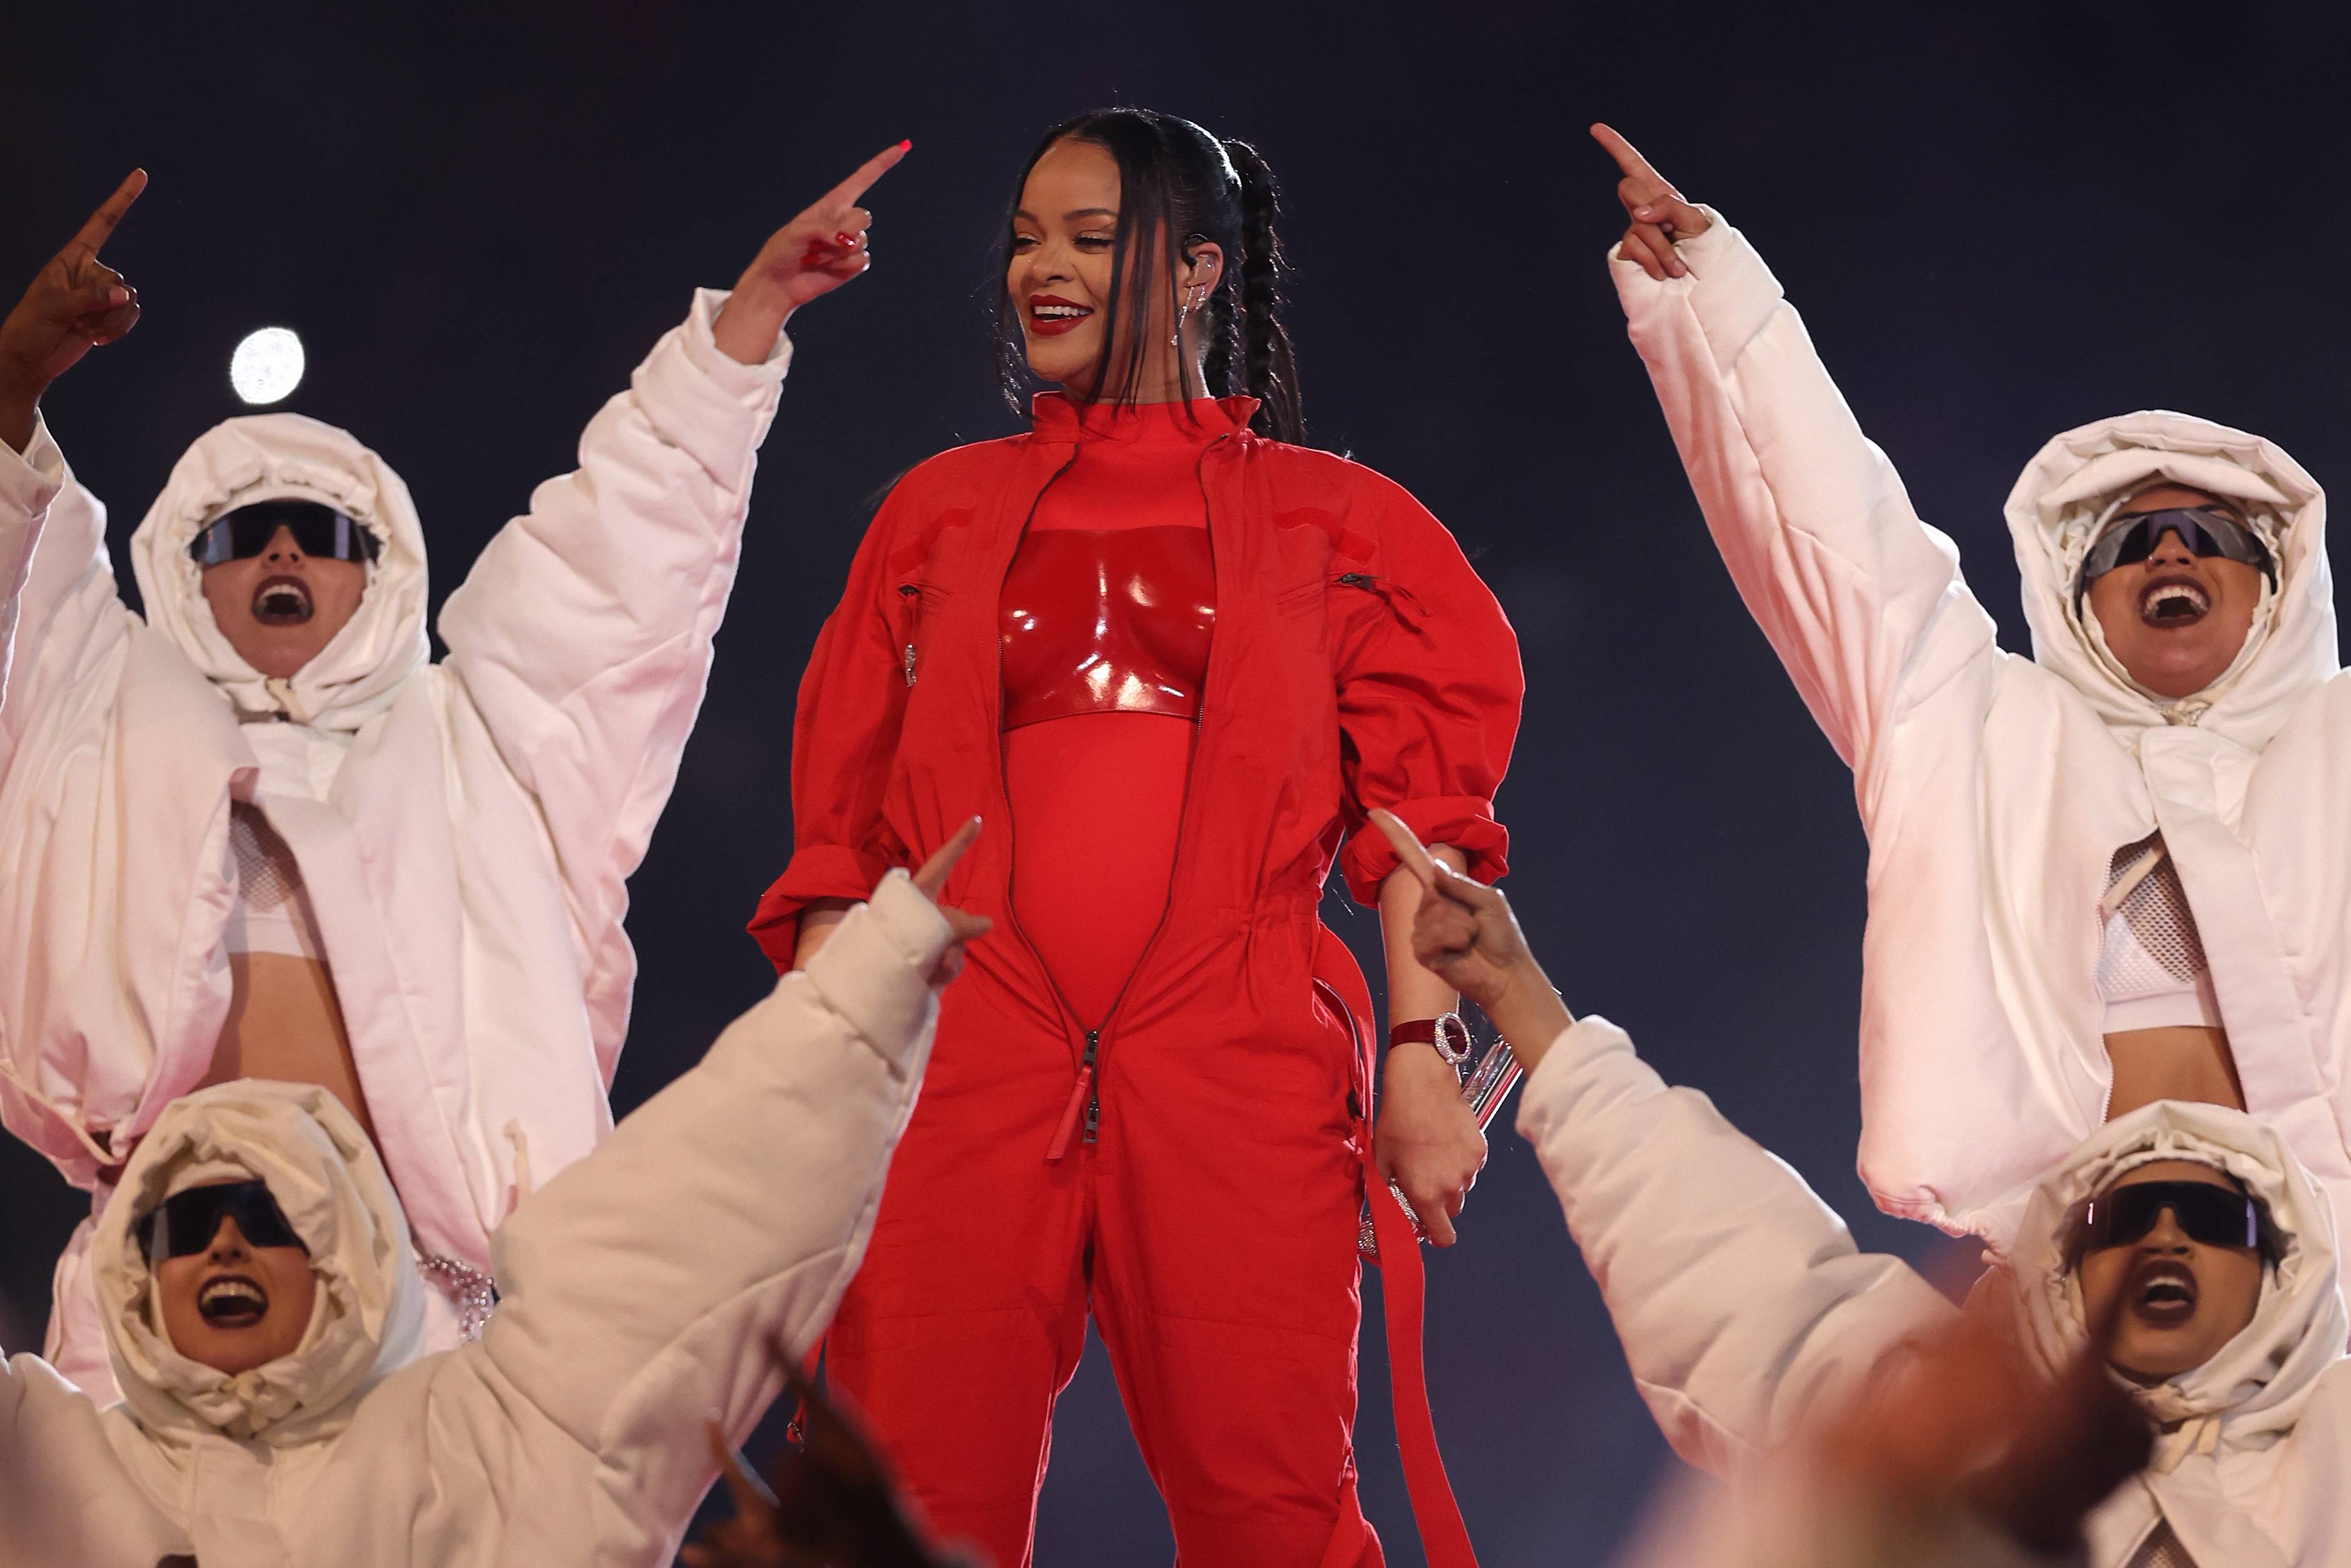 Rihanna performs onstage during the Apple Music Super Bowl LVII Halftime Show at State Farm Stadium on February 12, 2023 in Glendale, Arizona